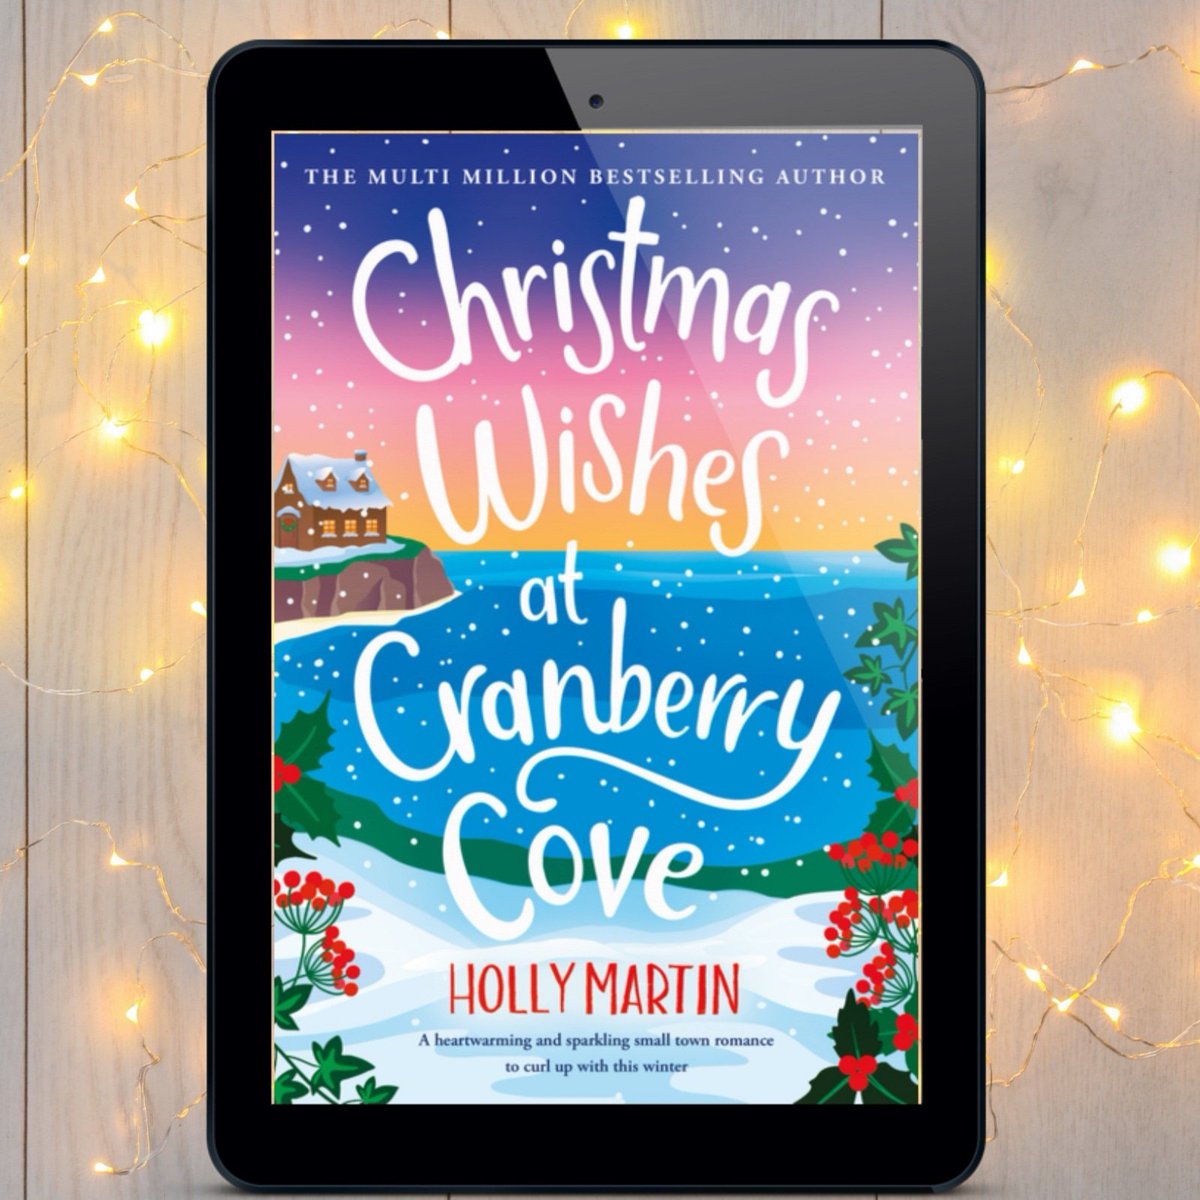 You all asked for it, so here it is, the beautiful sparkly cover for Shay and Orla's story, Christmas Wishes at Cranberry Cove. It might just be the most beautiful cover ever. You can preorder your copy here today. geni.us/CranberryCove